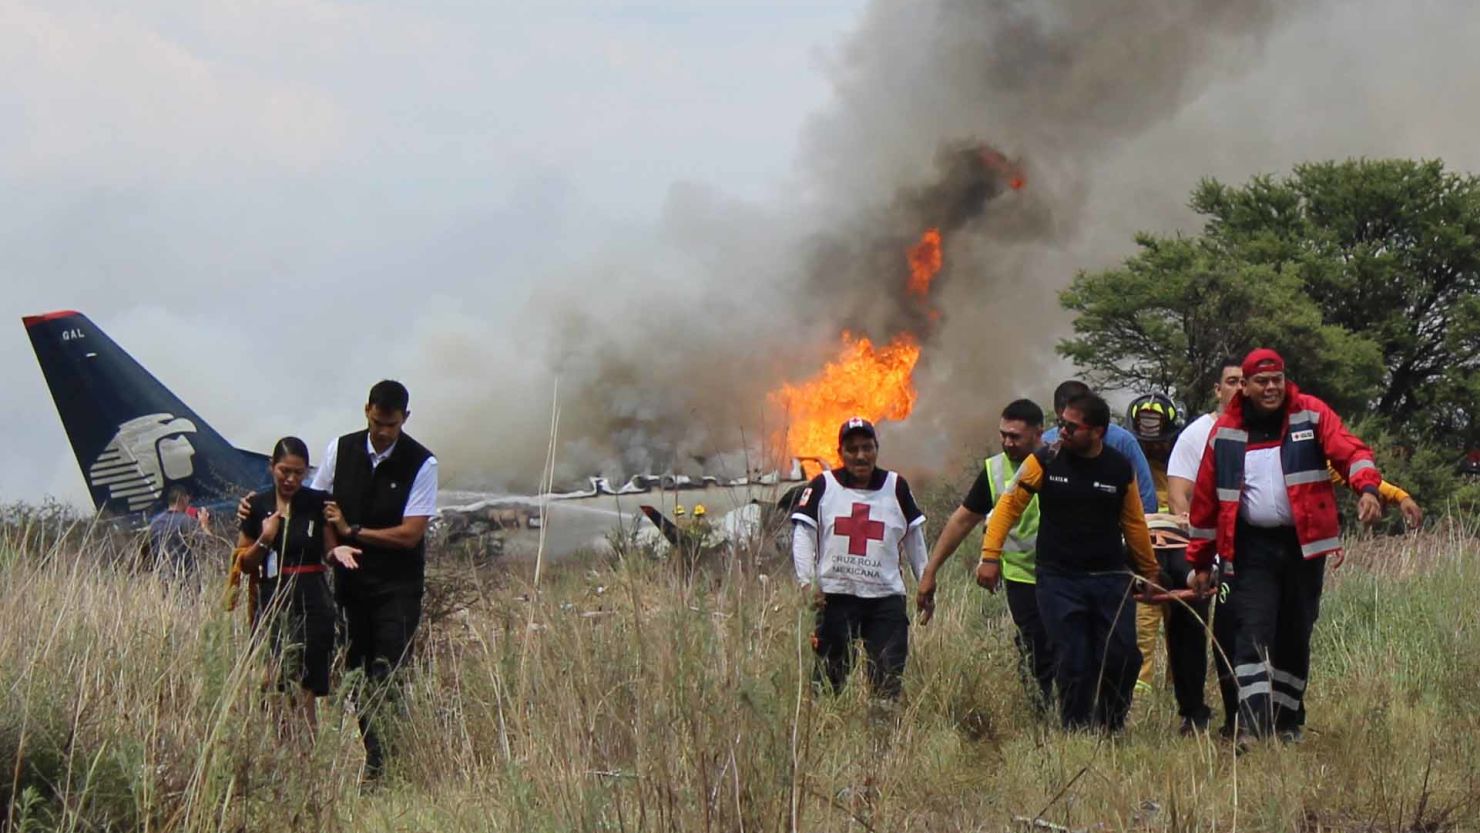 Red Cross workers and rescue workers carry an injured person on a stretcher, right, as airline workers, left, walk away from the site where an Aeromexico airliner crashed in a field near the airport in Durango, Mexico, in July 2018.